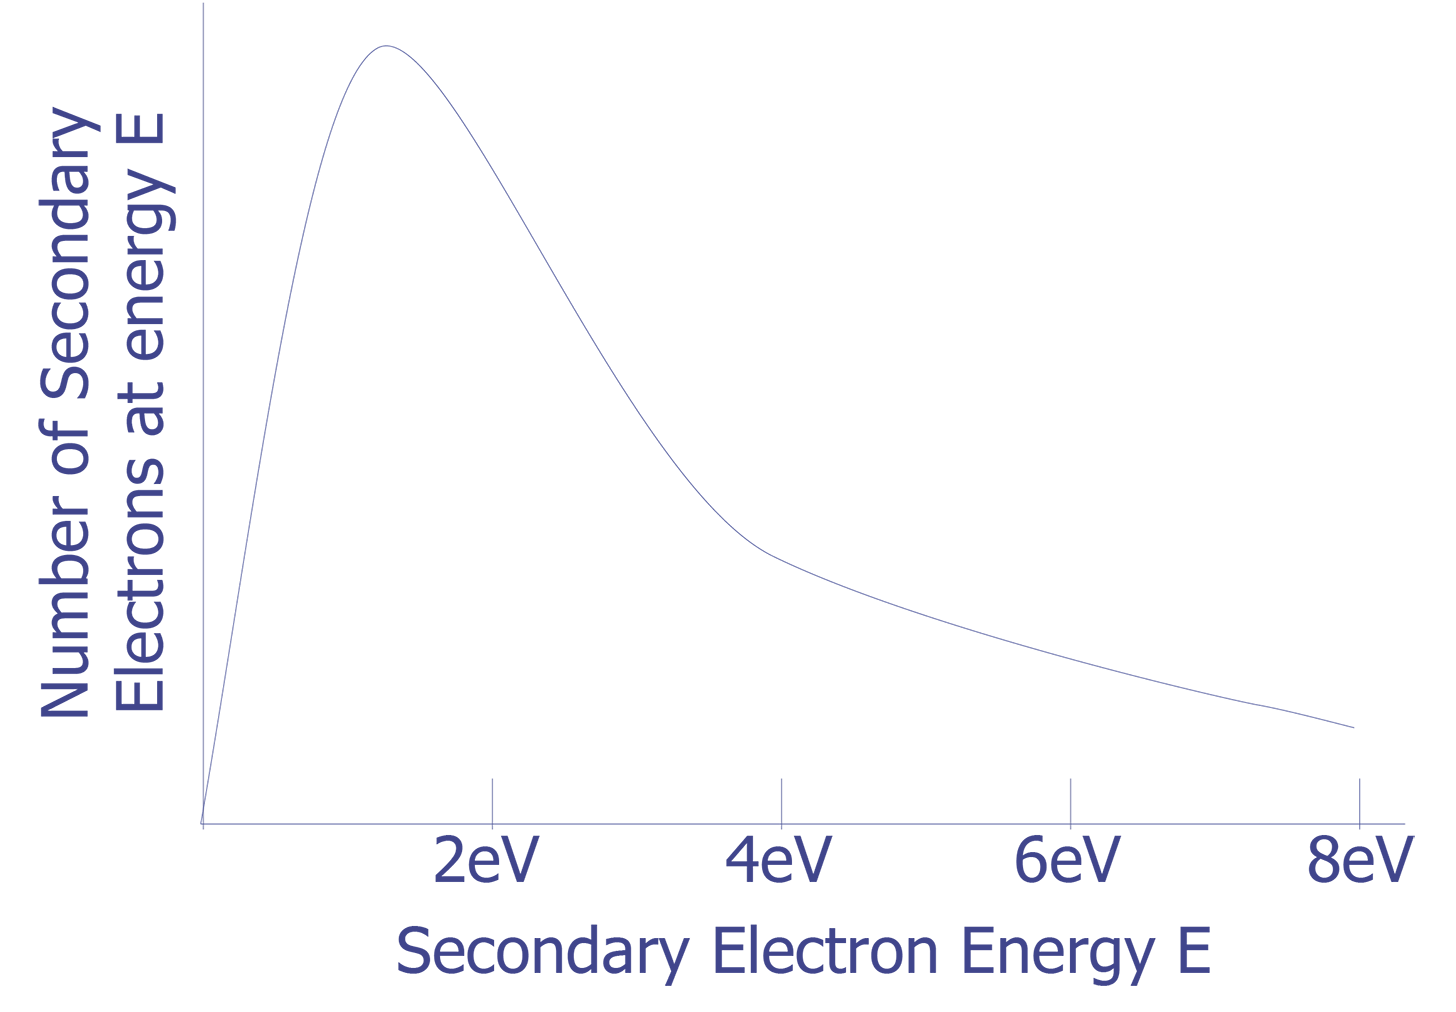 Typical Secondary Electron Energy Distribution